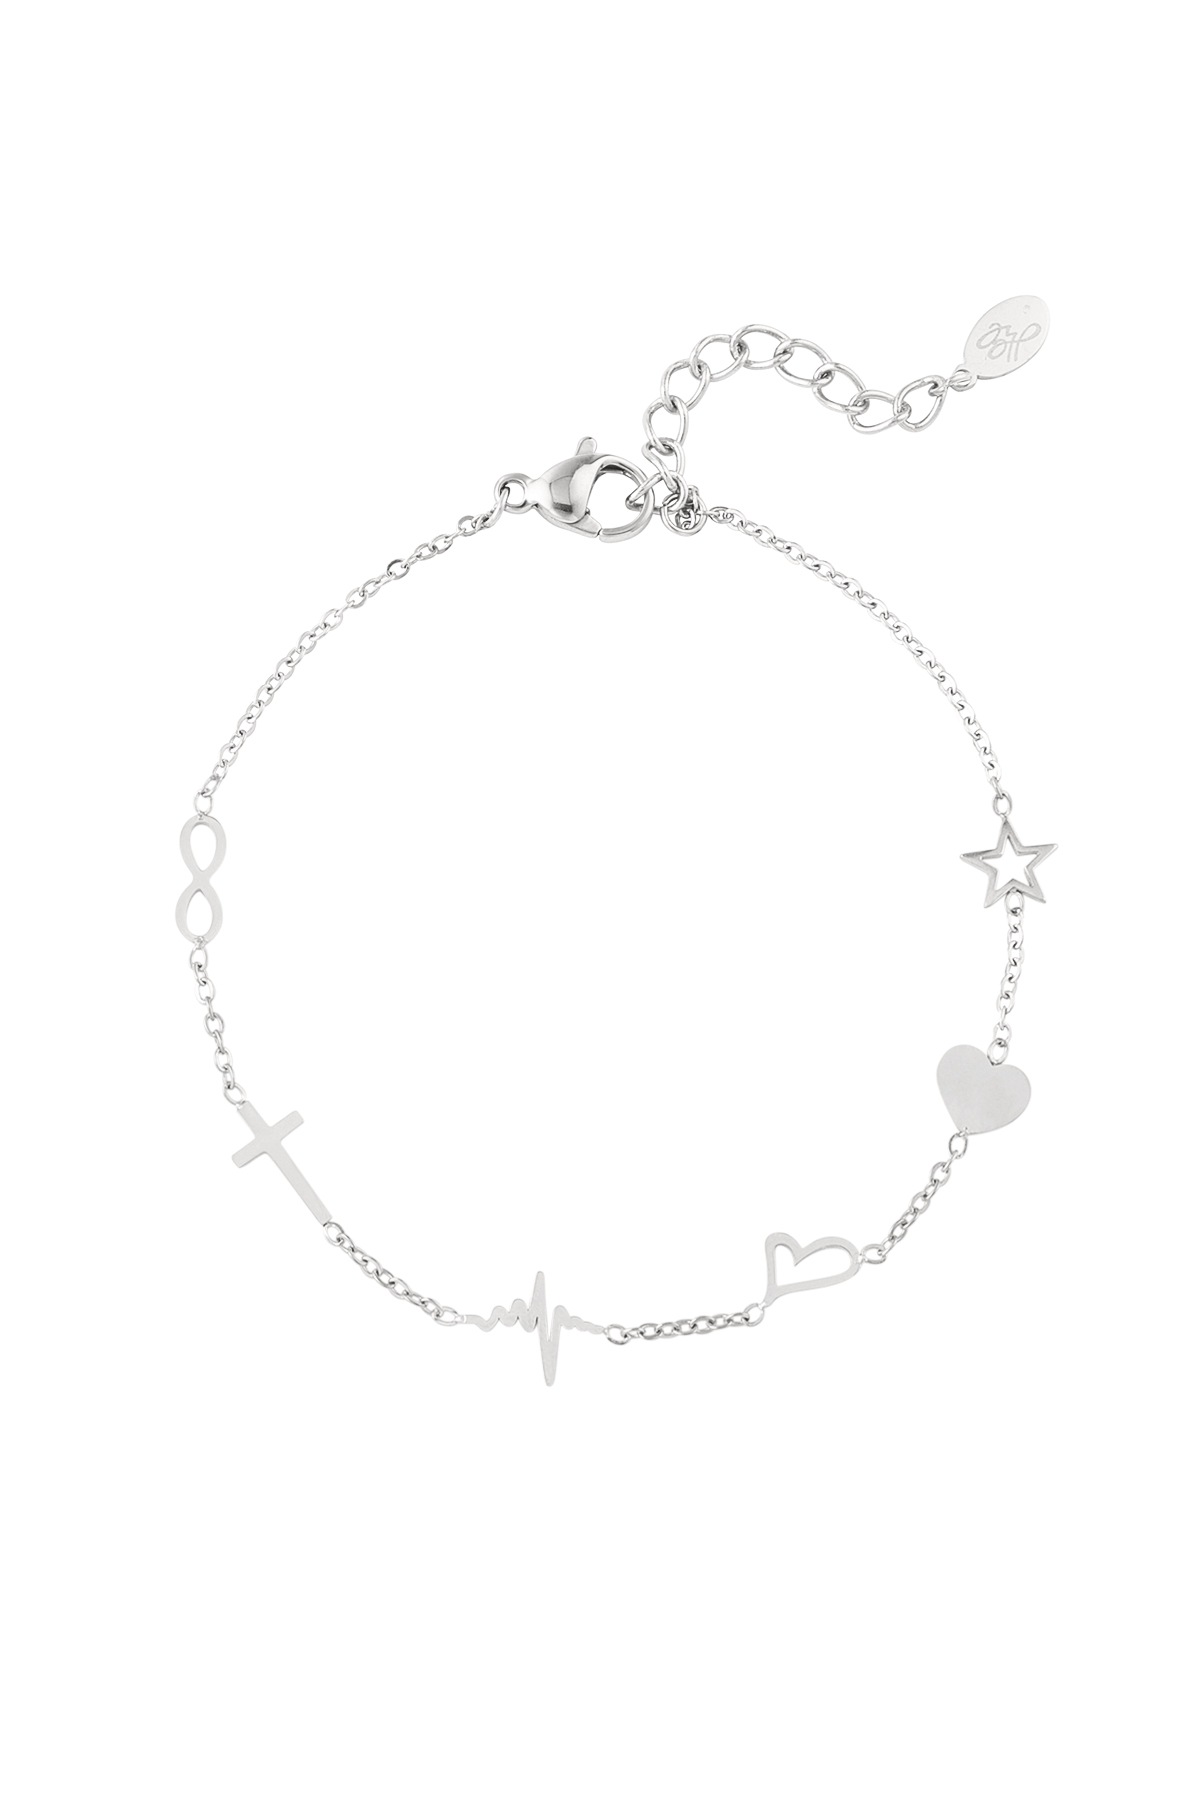 Bracelet charms - Silver Stainless Steel